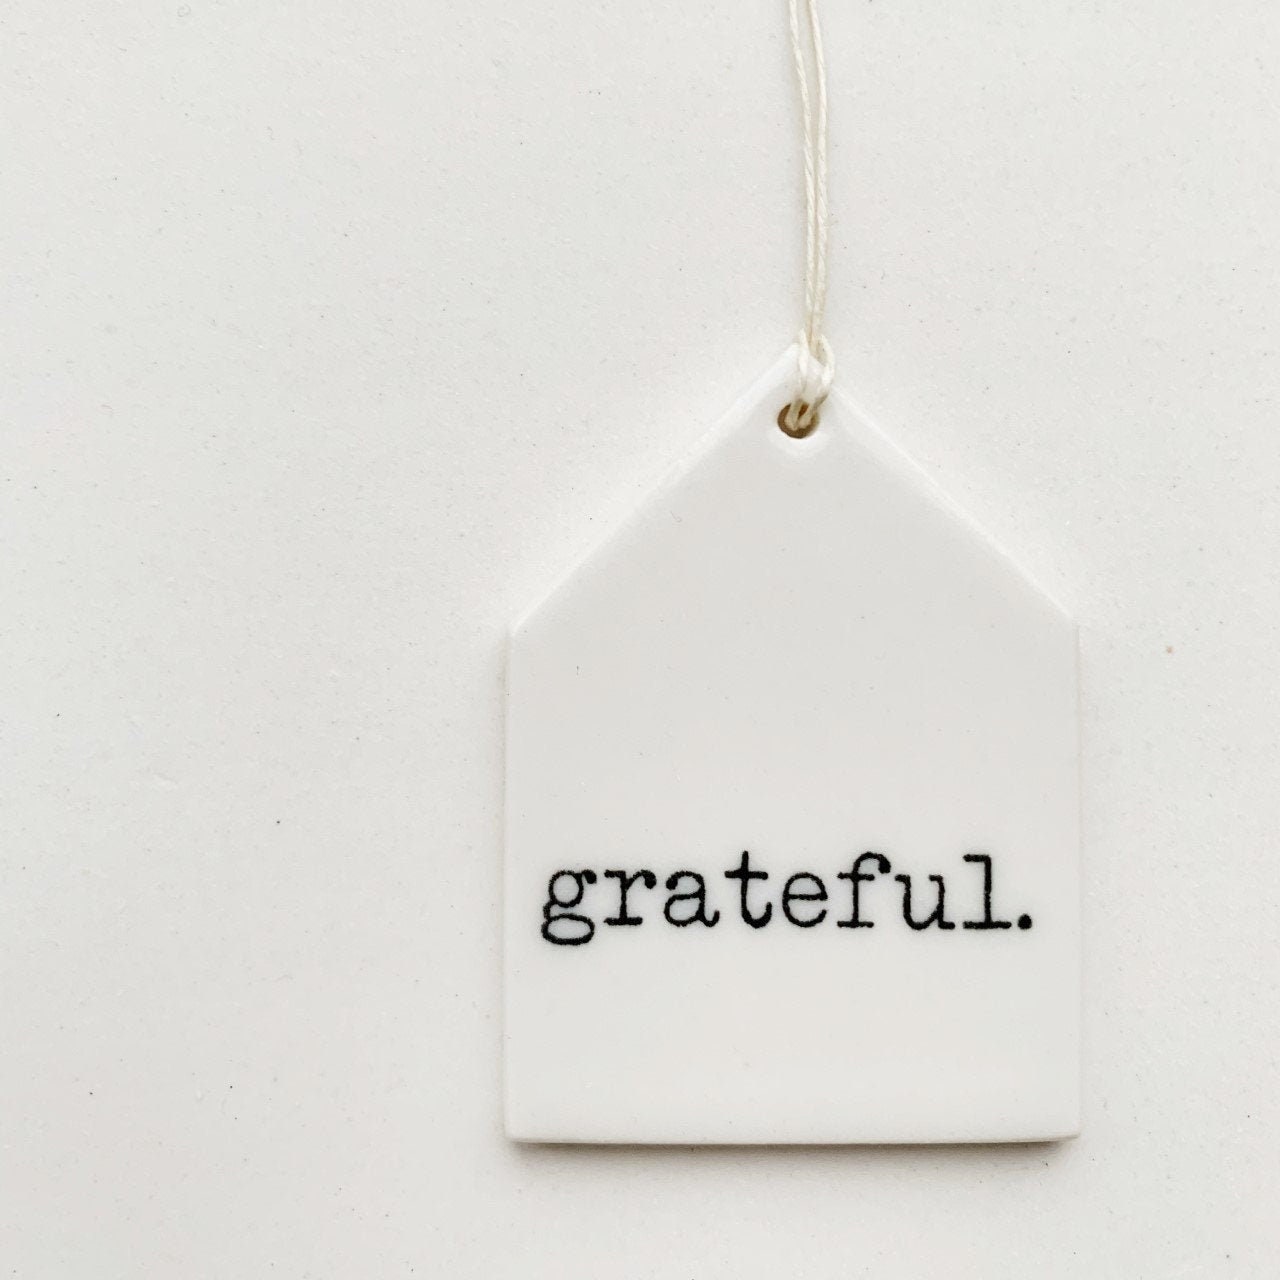 grateful quote | gratitude quote | ceramic wall tag | ceramic wall art | gift for friend | minimalist design | home decor | meaningful gift